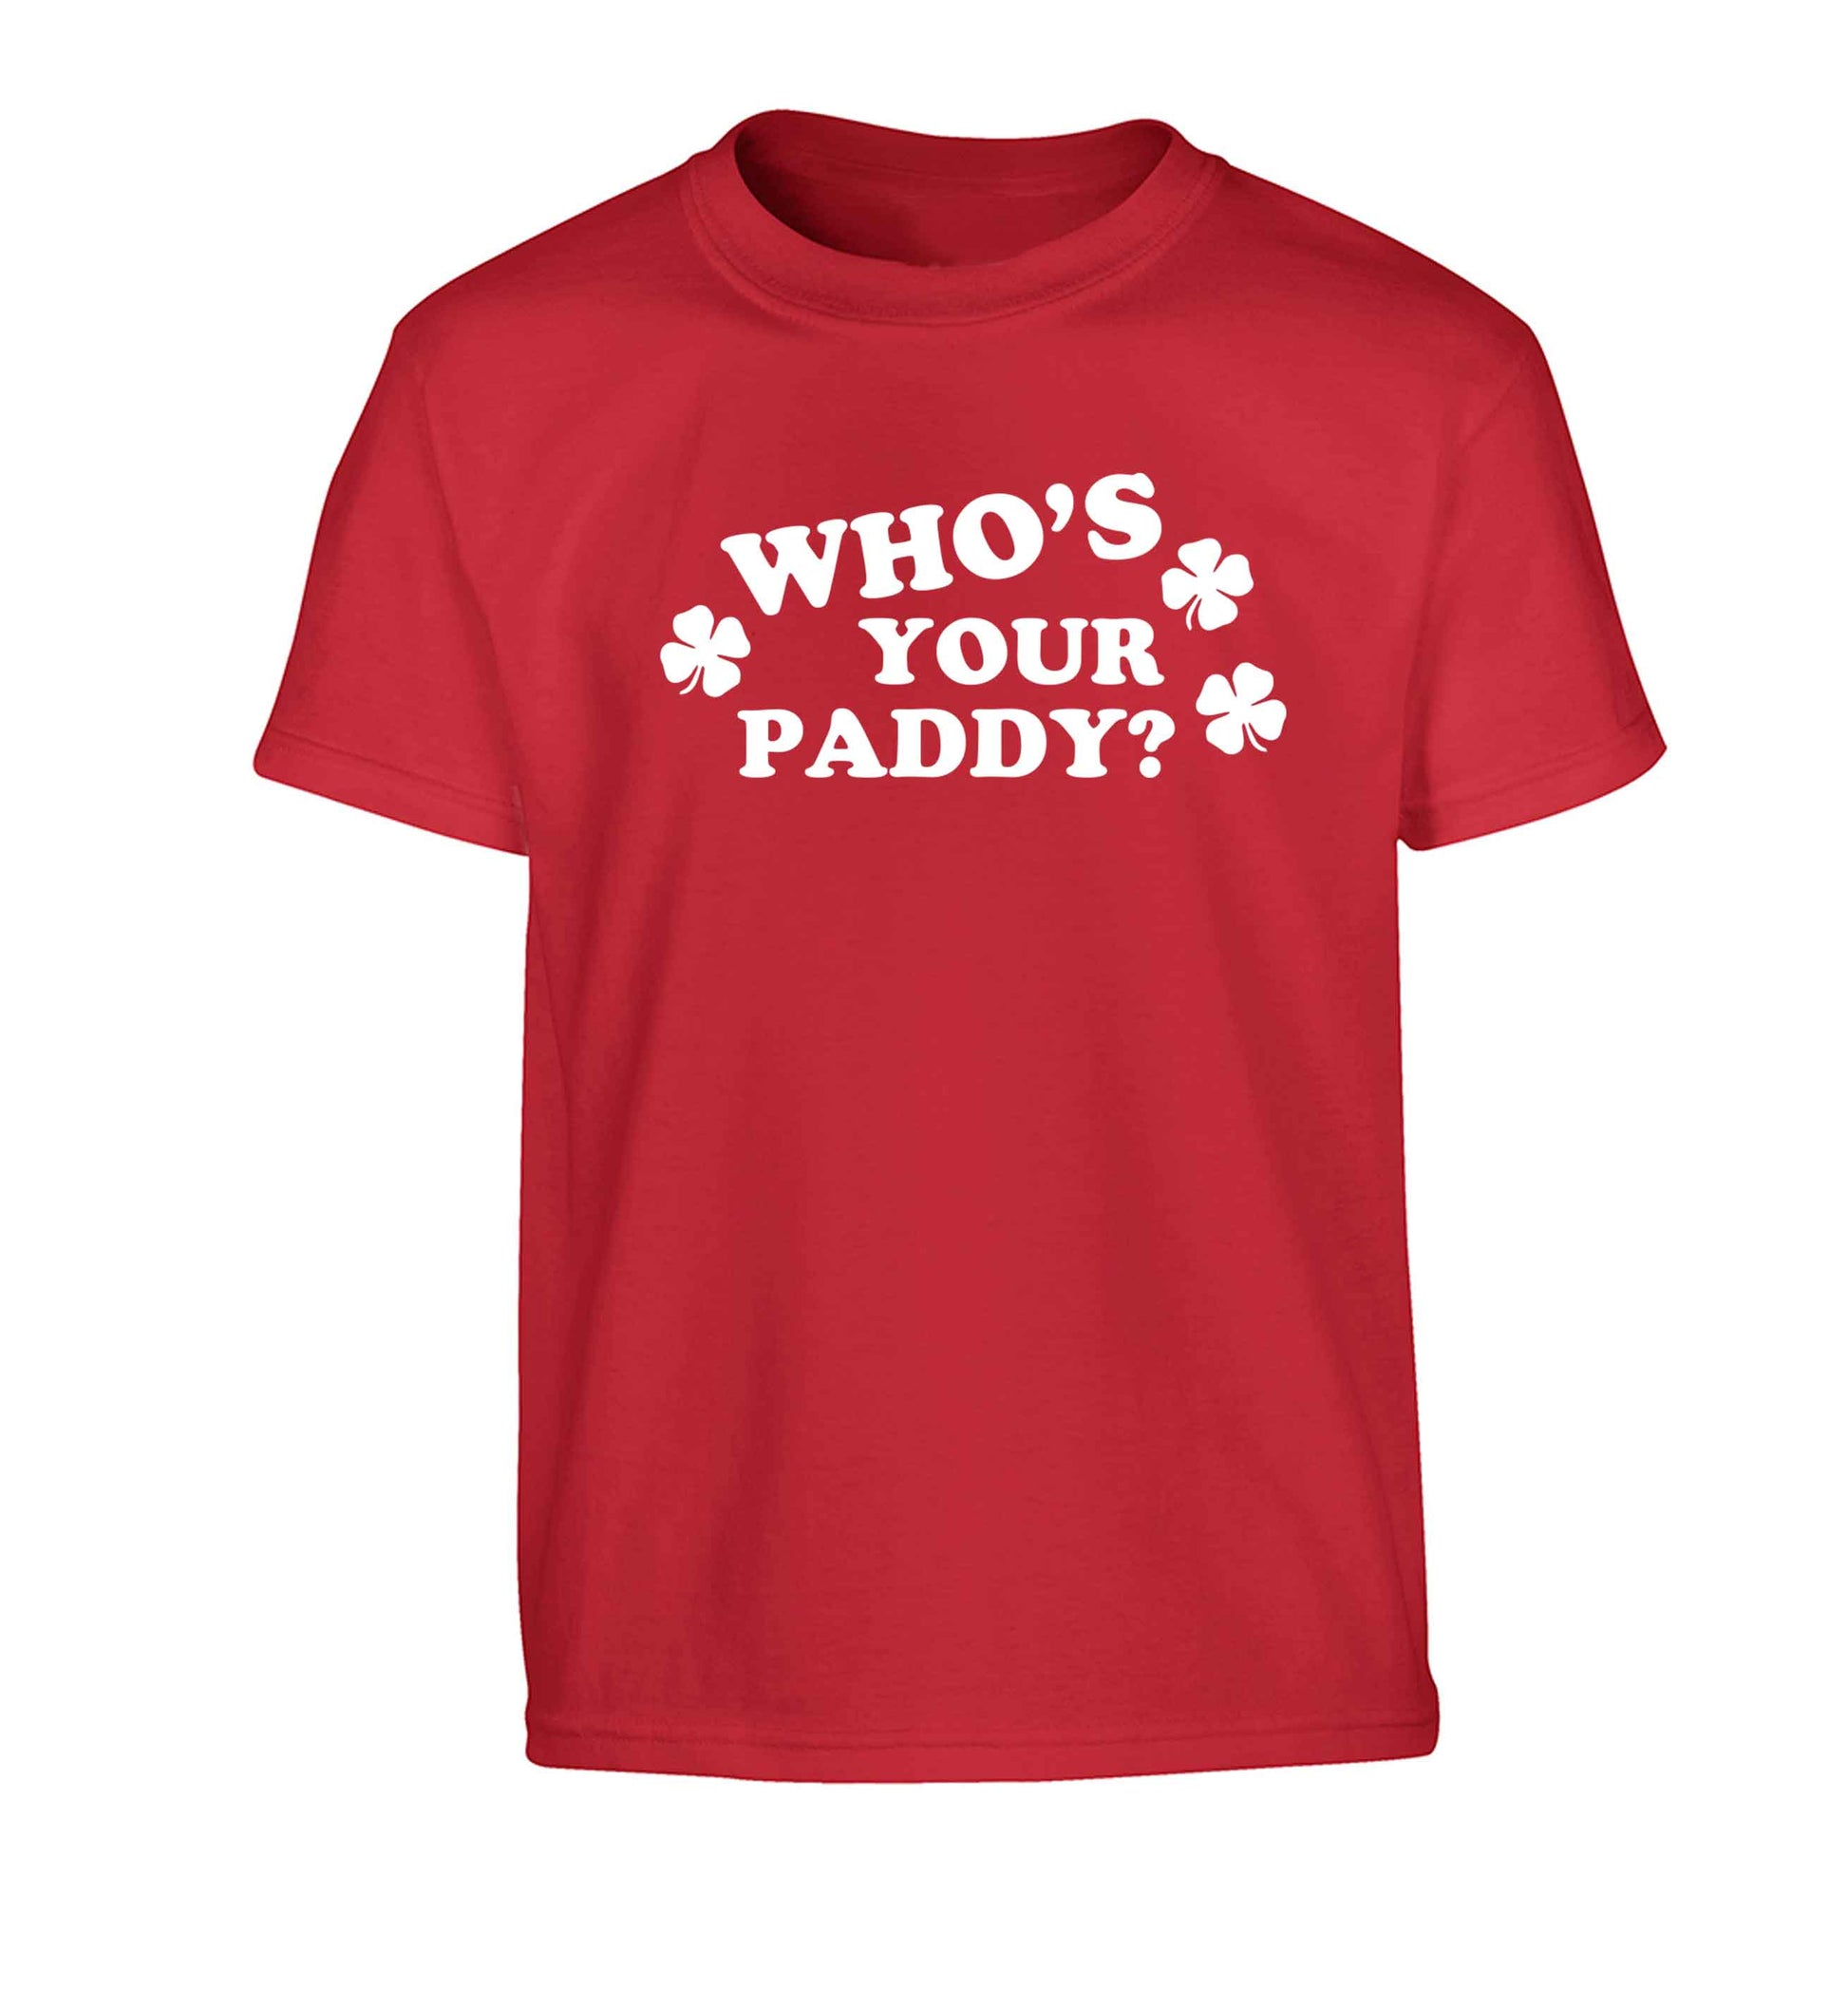 Who's your paddy? Children's red Tshirt 12-13 Years